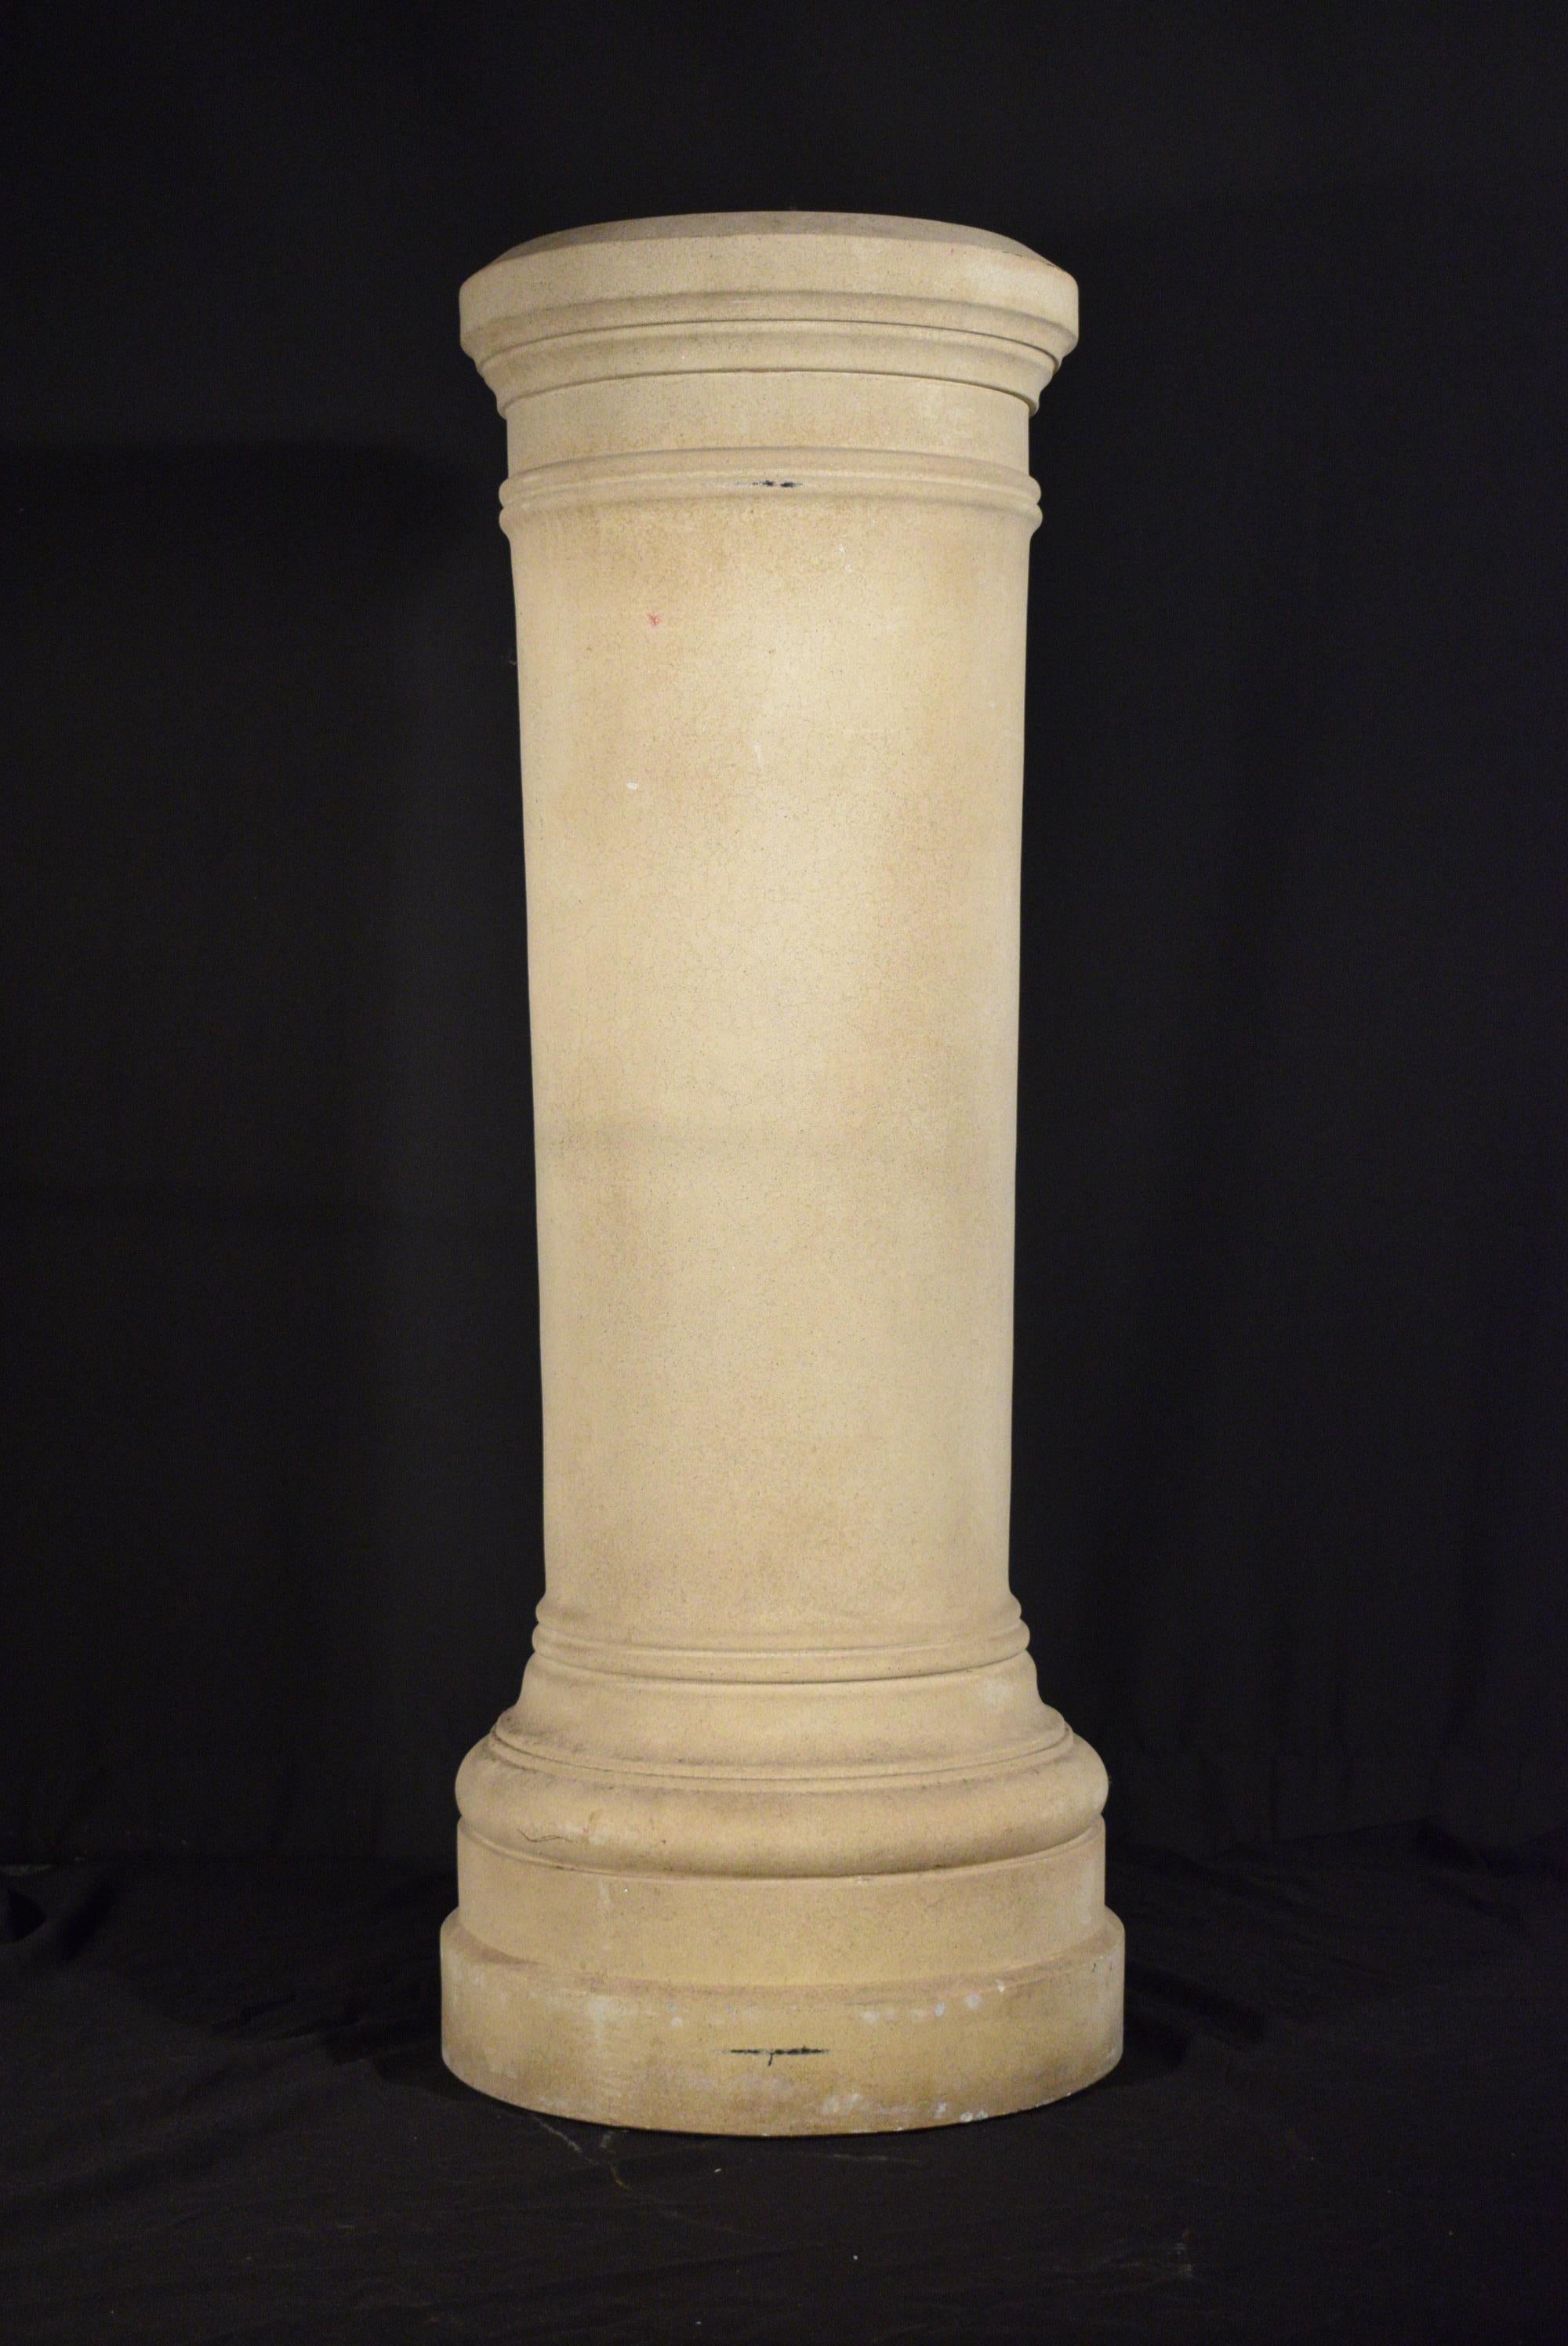 Pair of Michael Taylor Designs, Inc. (American, founded 1985) pair of unadorned cast stone circular columns or pedestals having a ringed body band. Raised on a conforming plinth.
Dimensions: Height 47